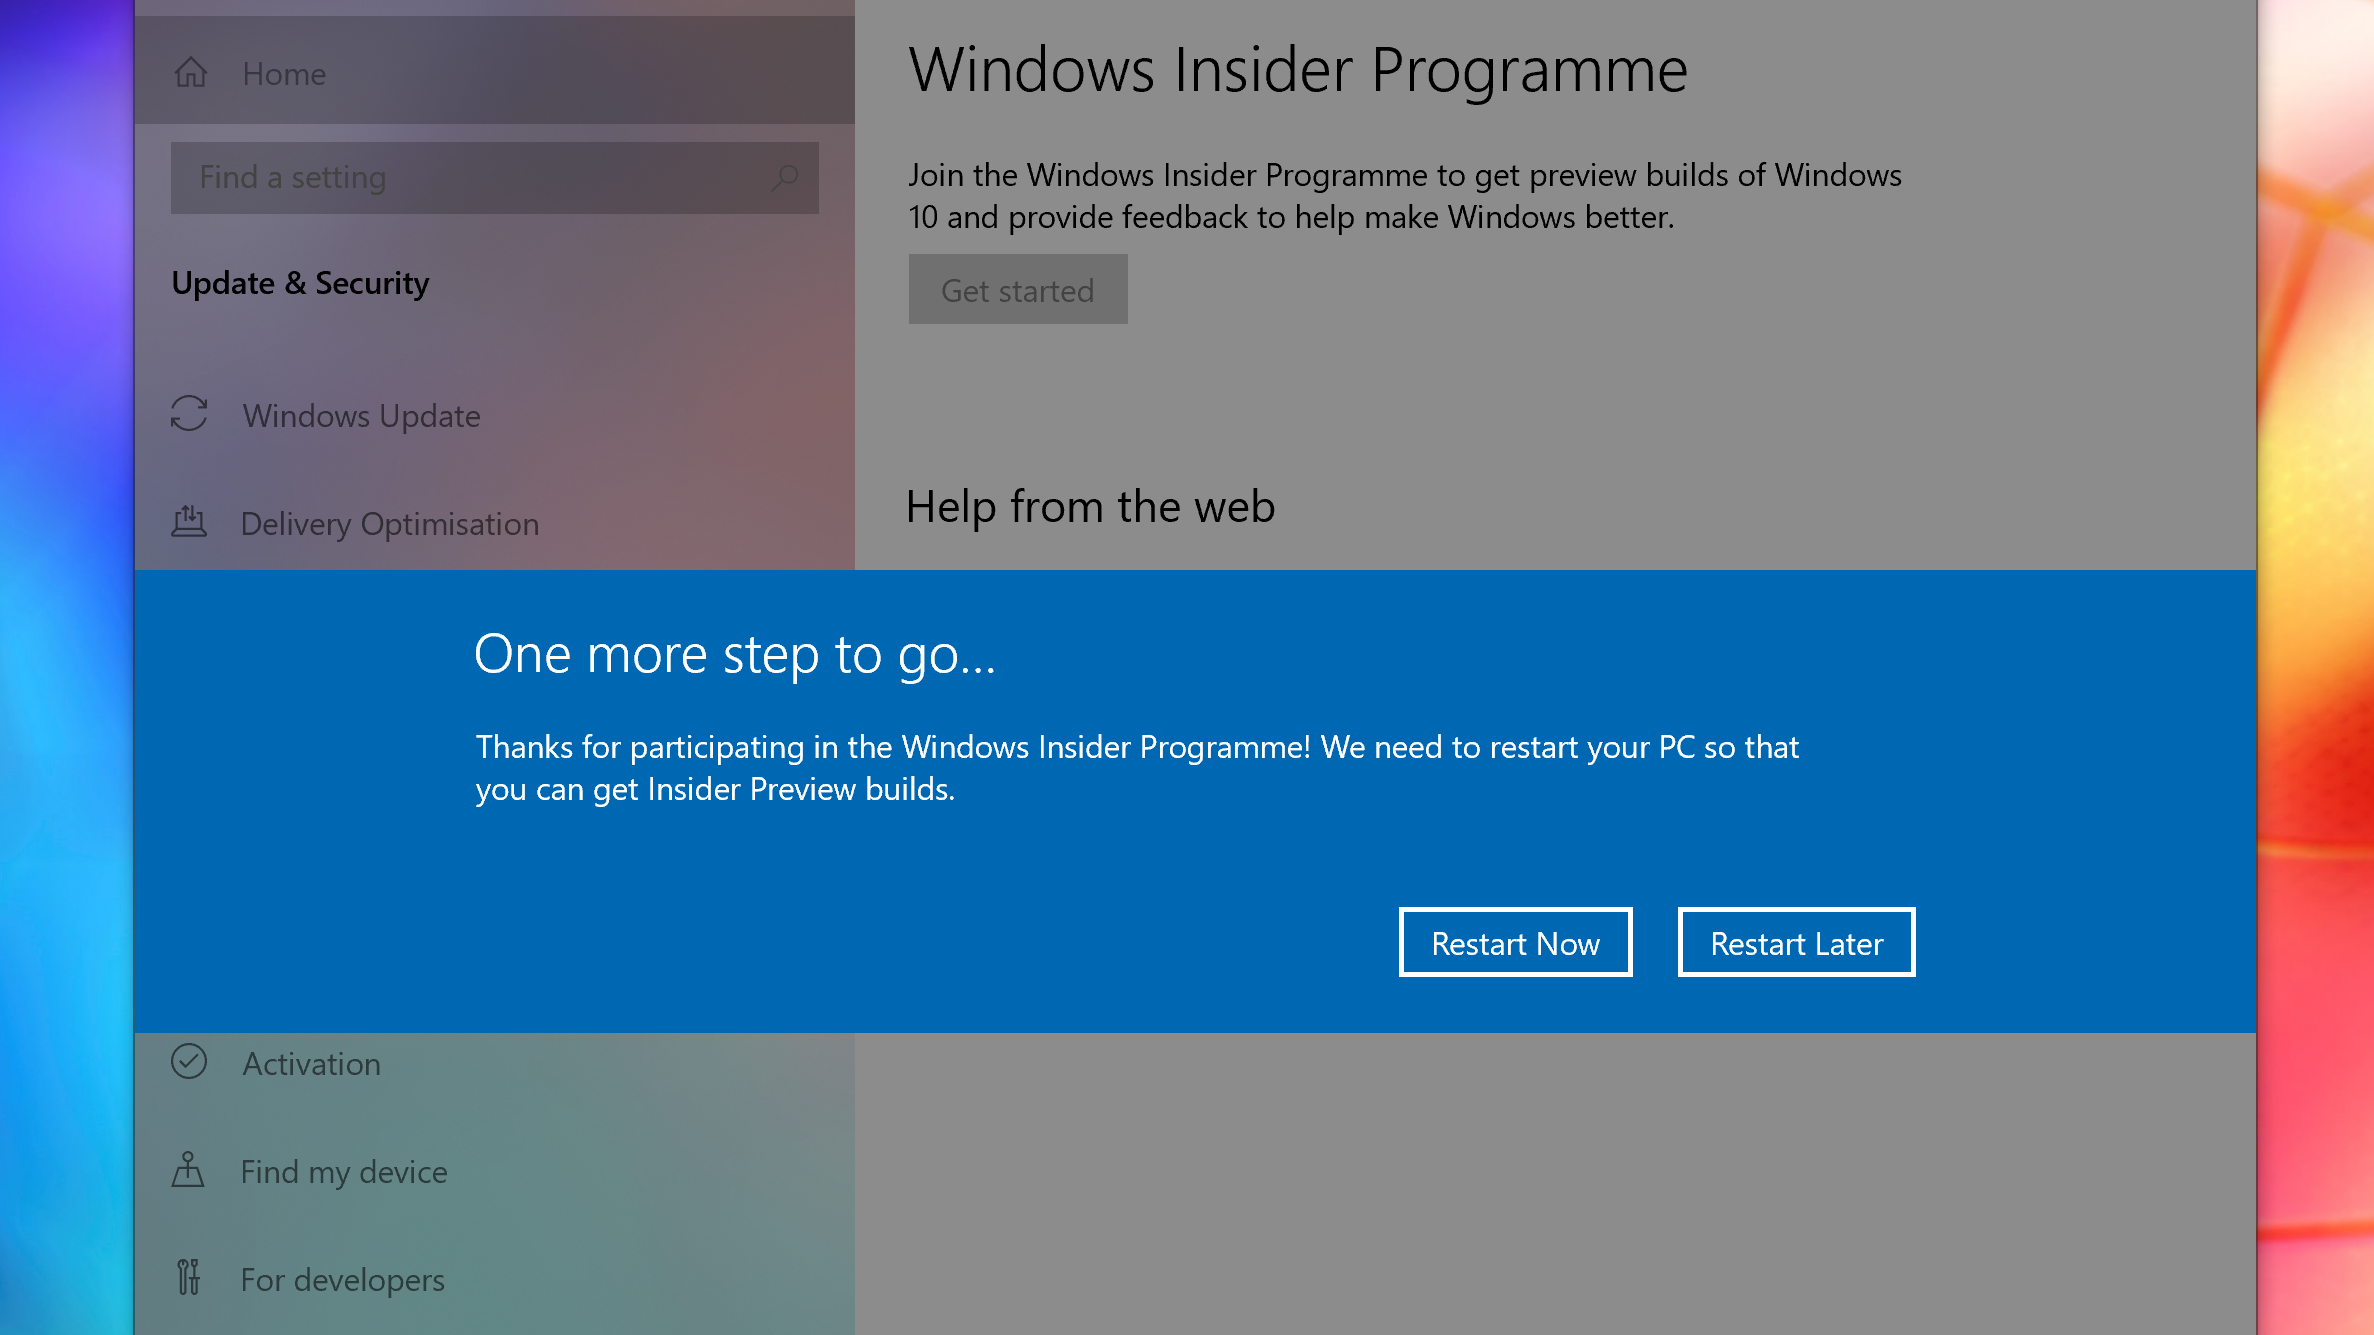 what happens if i download windows 11